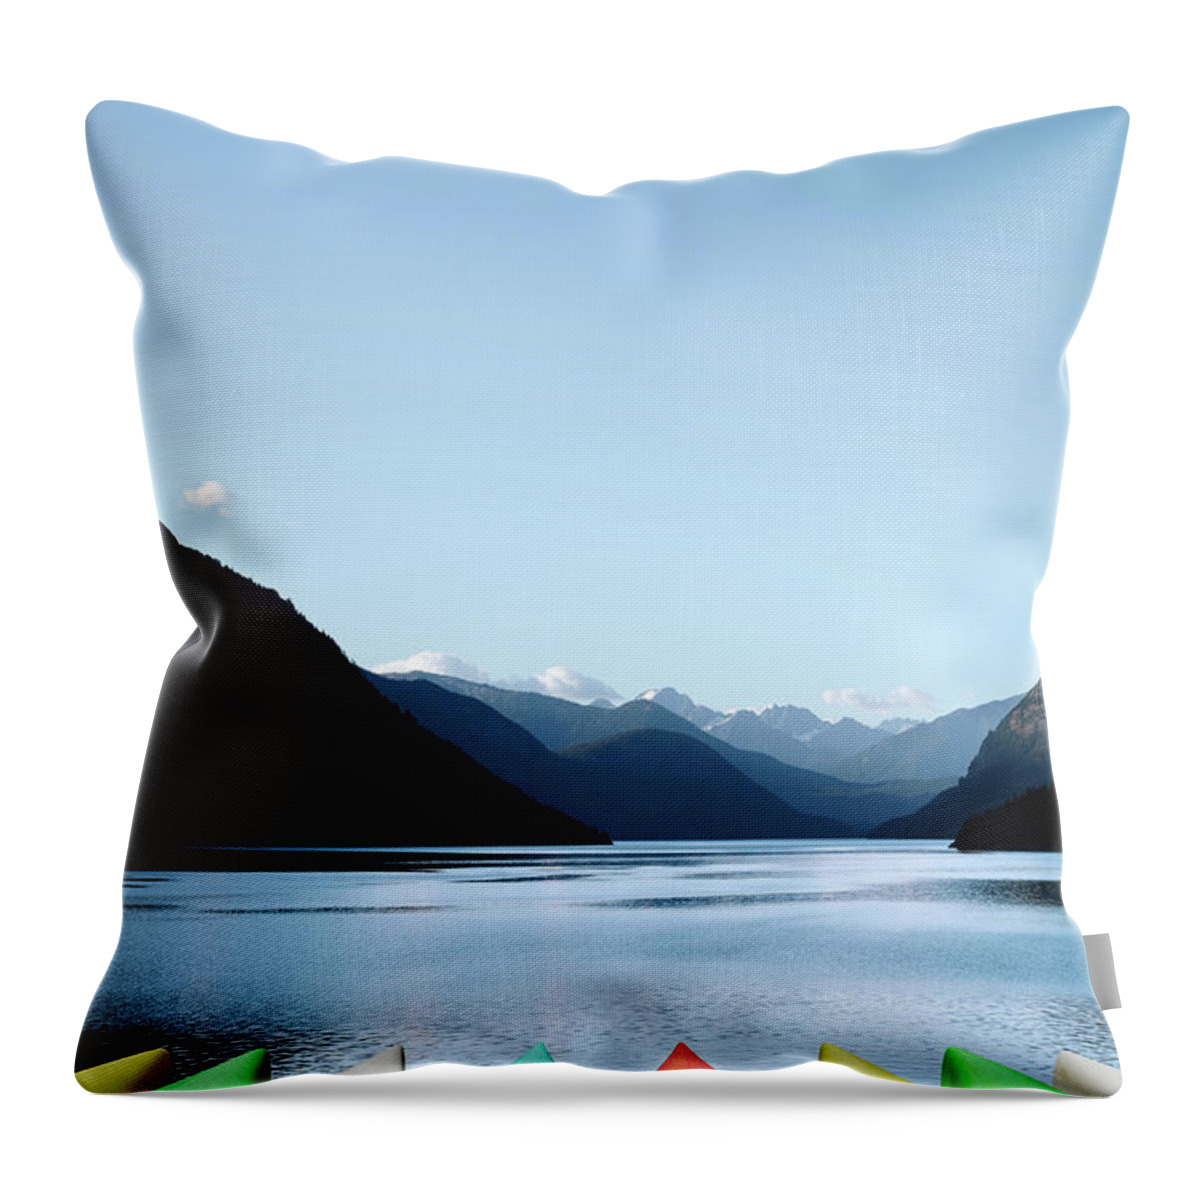 Scenics Throw Pillow featuring the photograph Xxxl Canoes And Mountain Lake by Sharply done